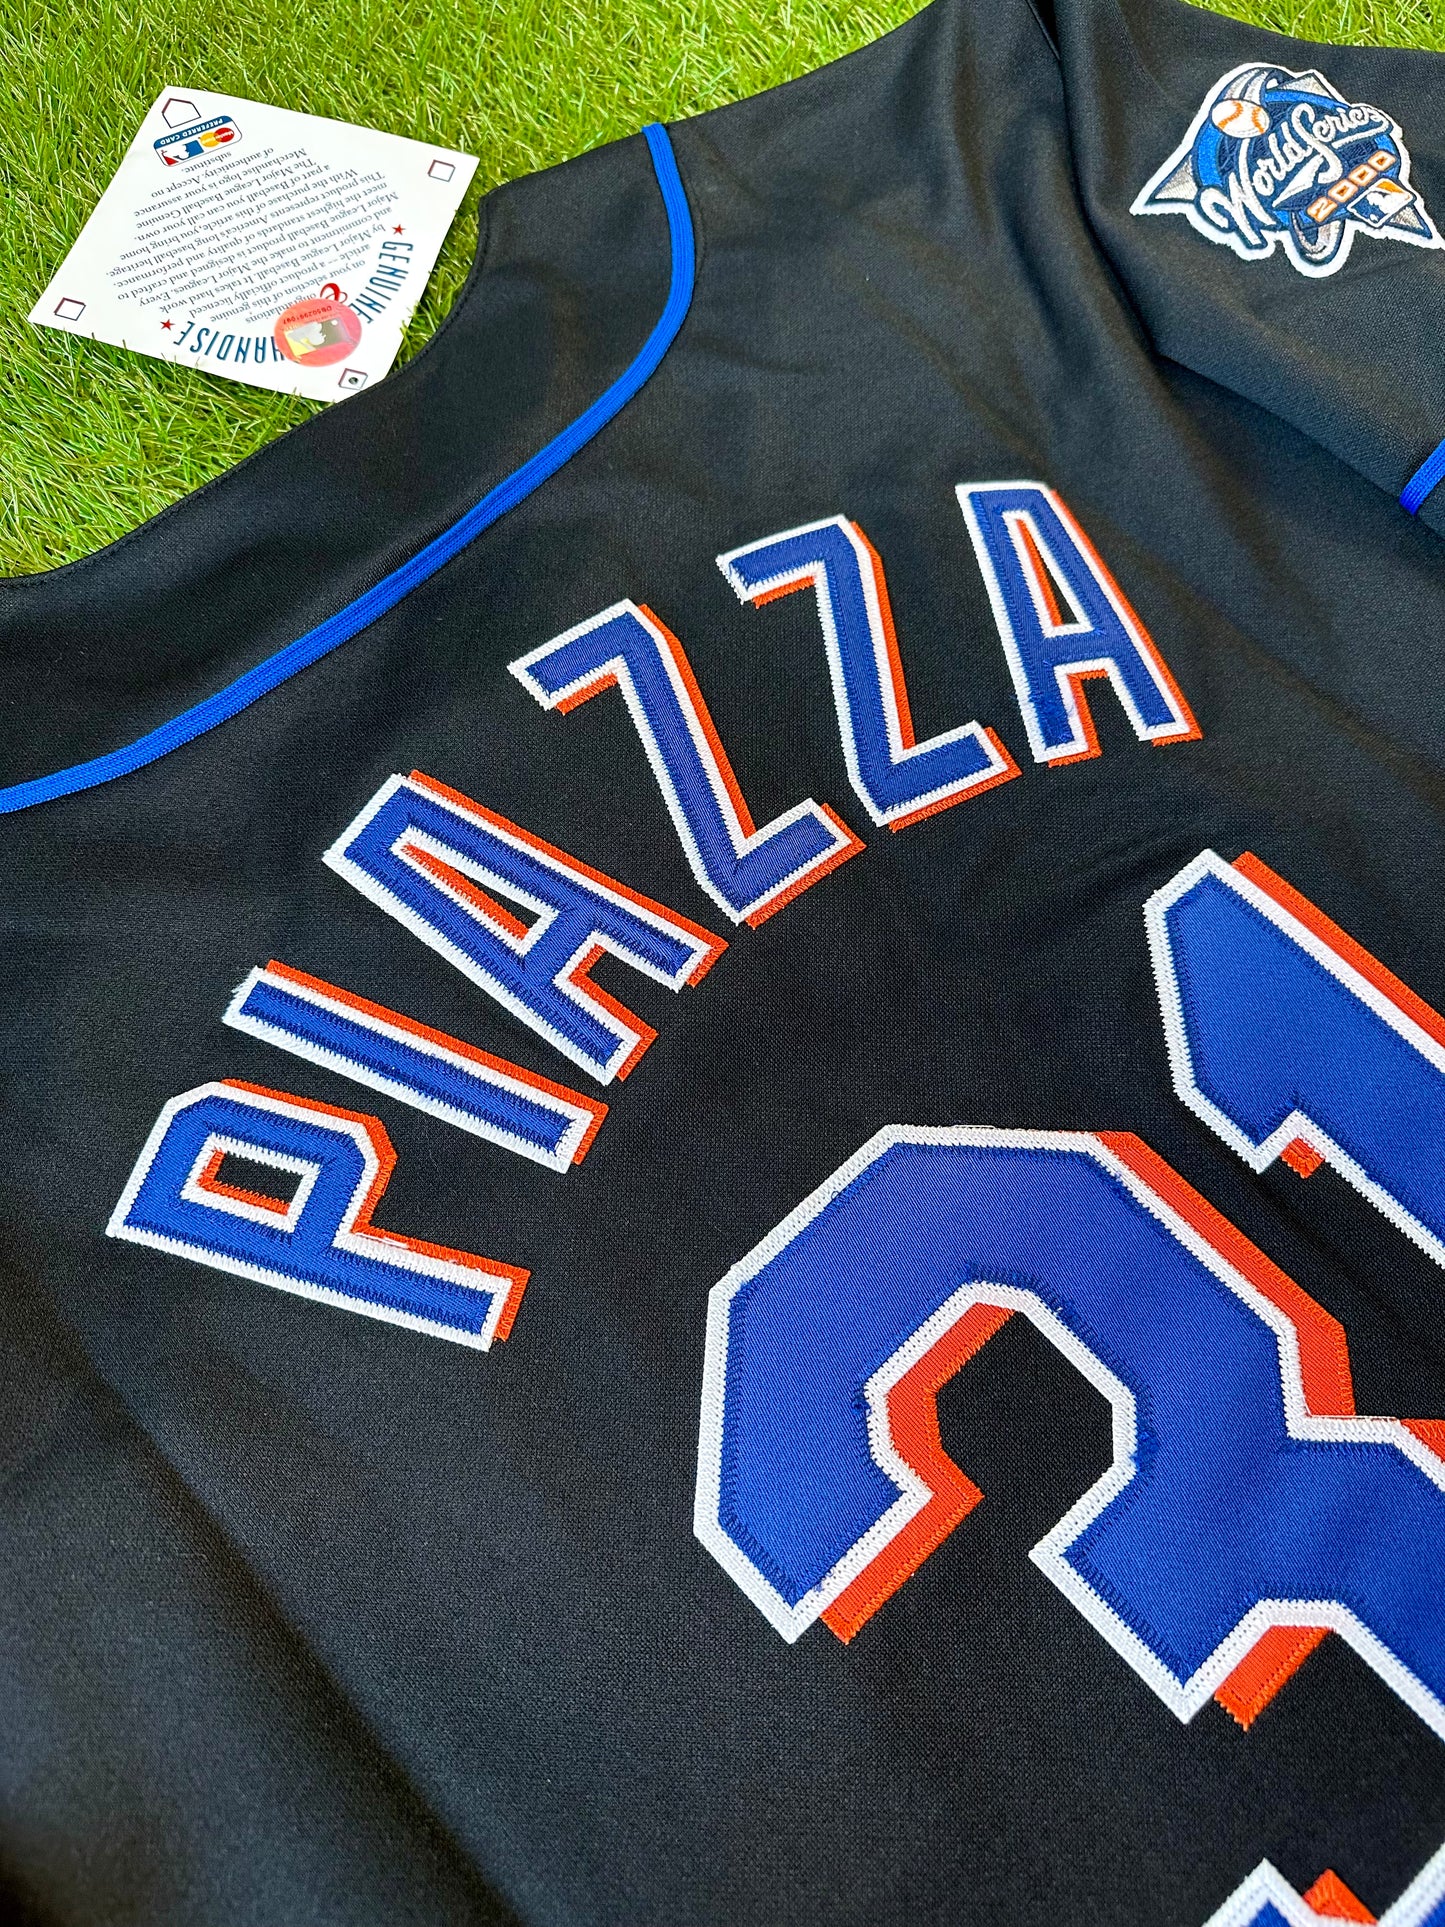 Mike Piazza's 40th Anniversary Jersey - Mets History